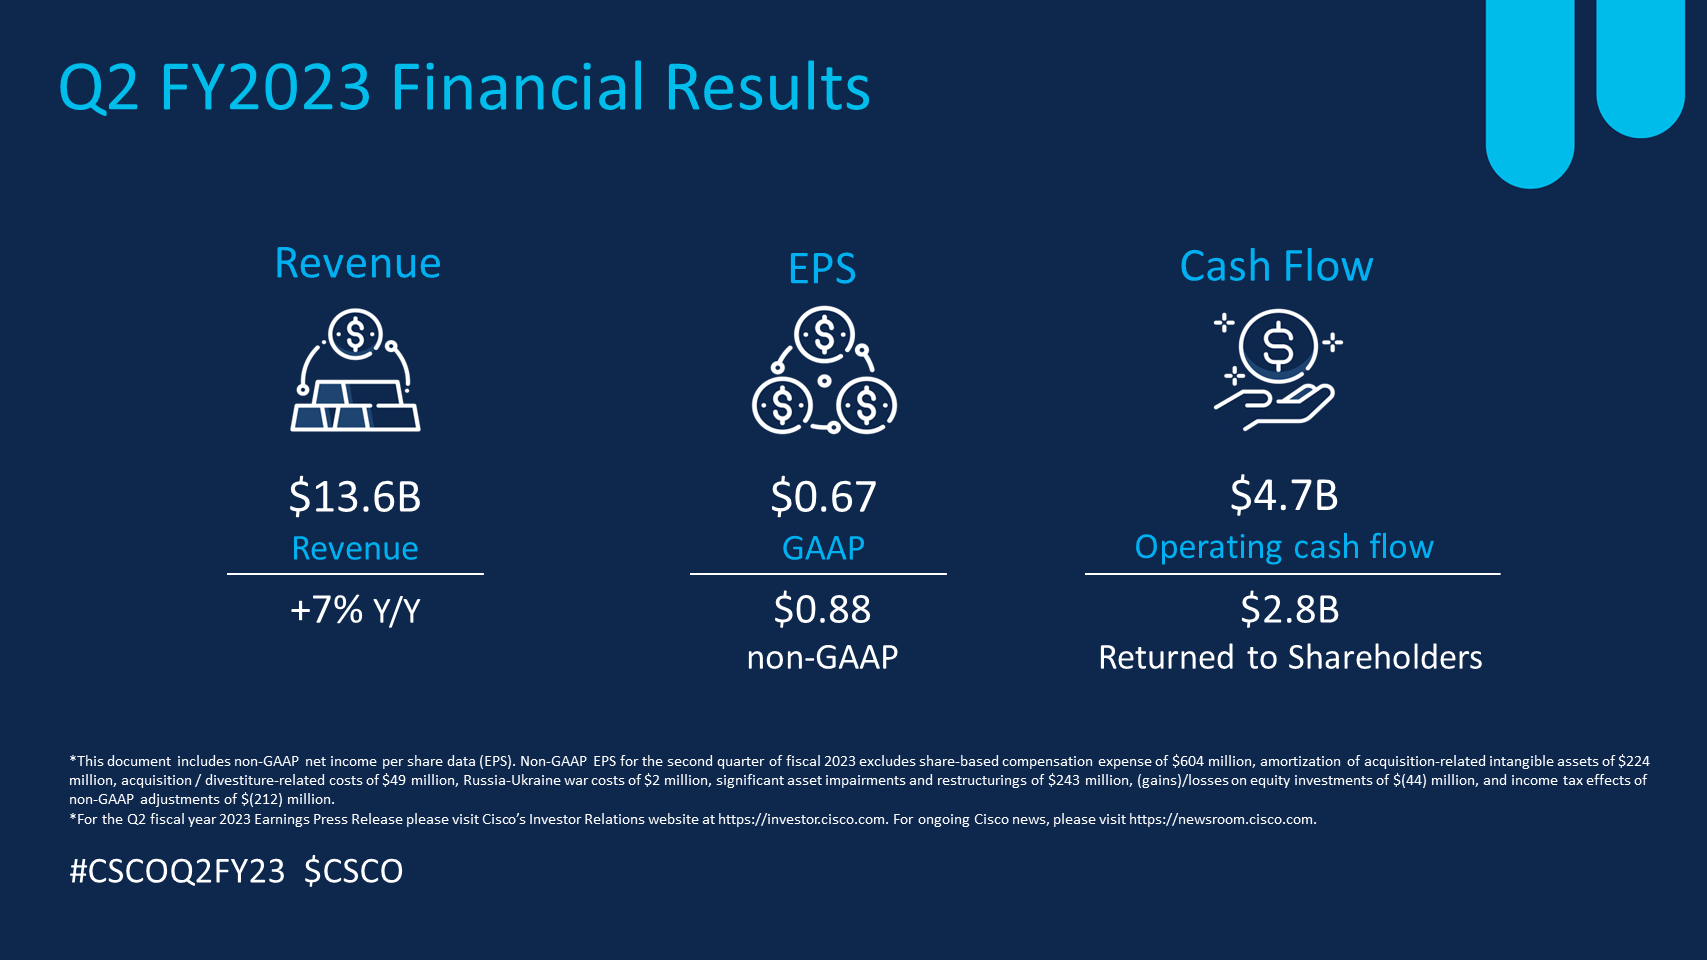 Q2 FY2023 Financial Results Infographic